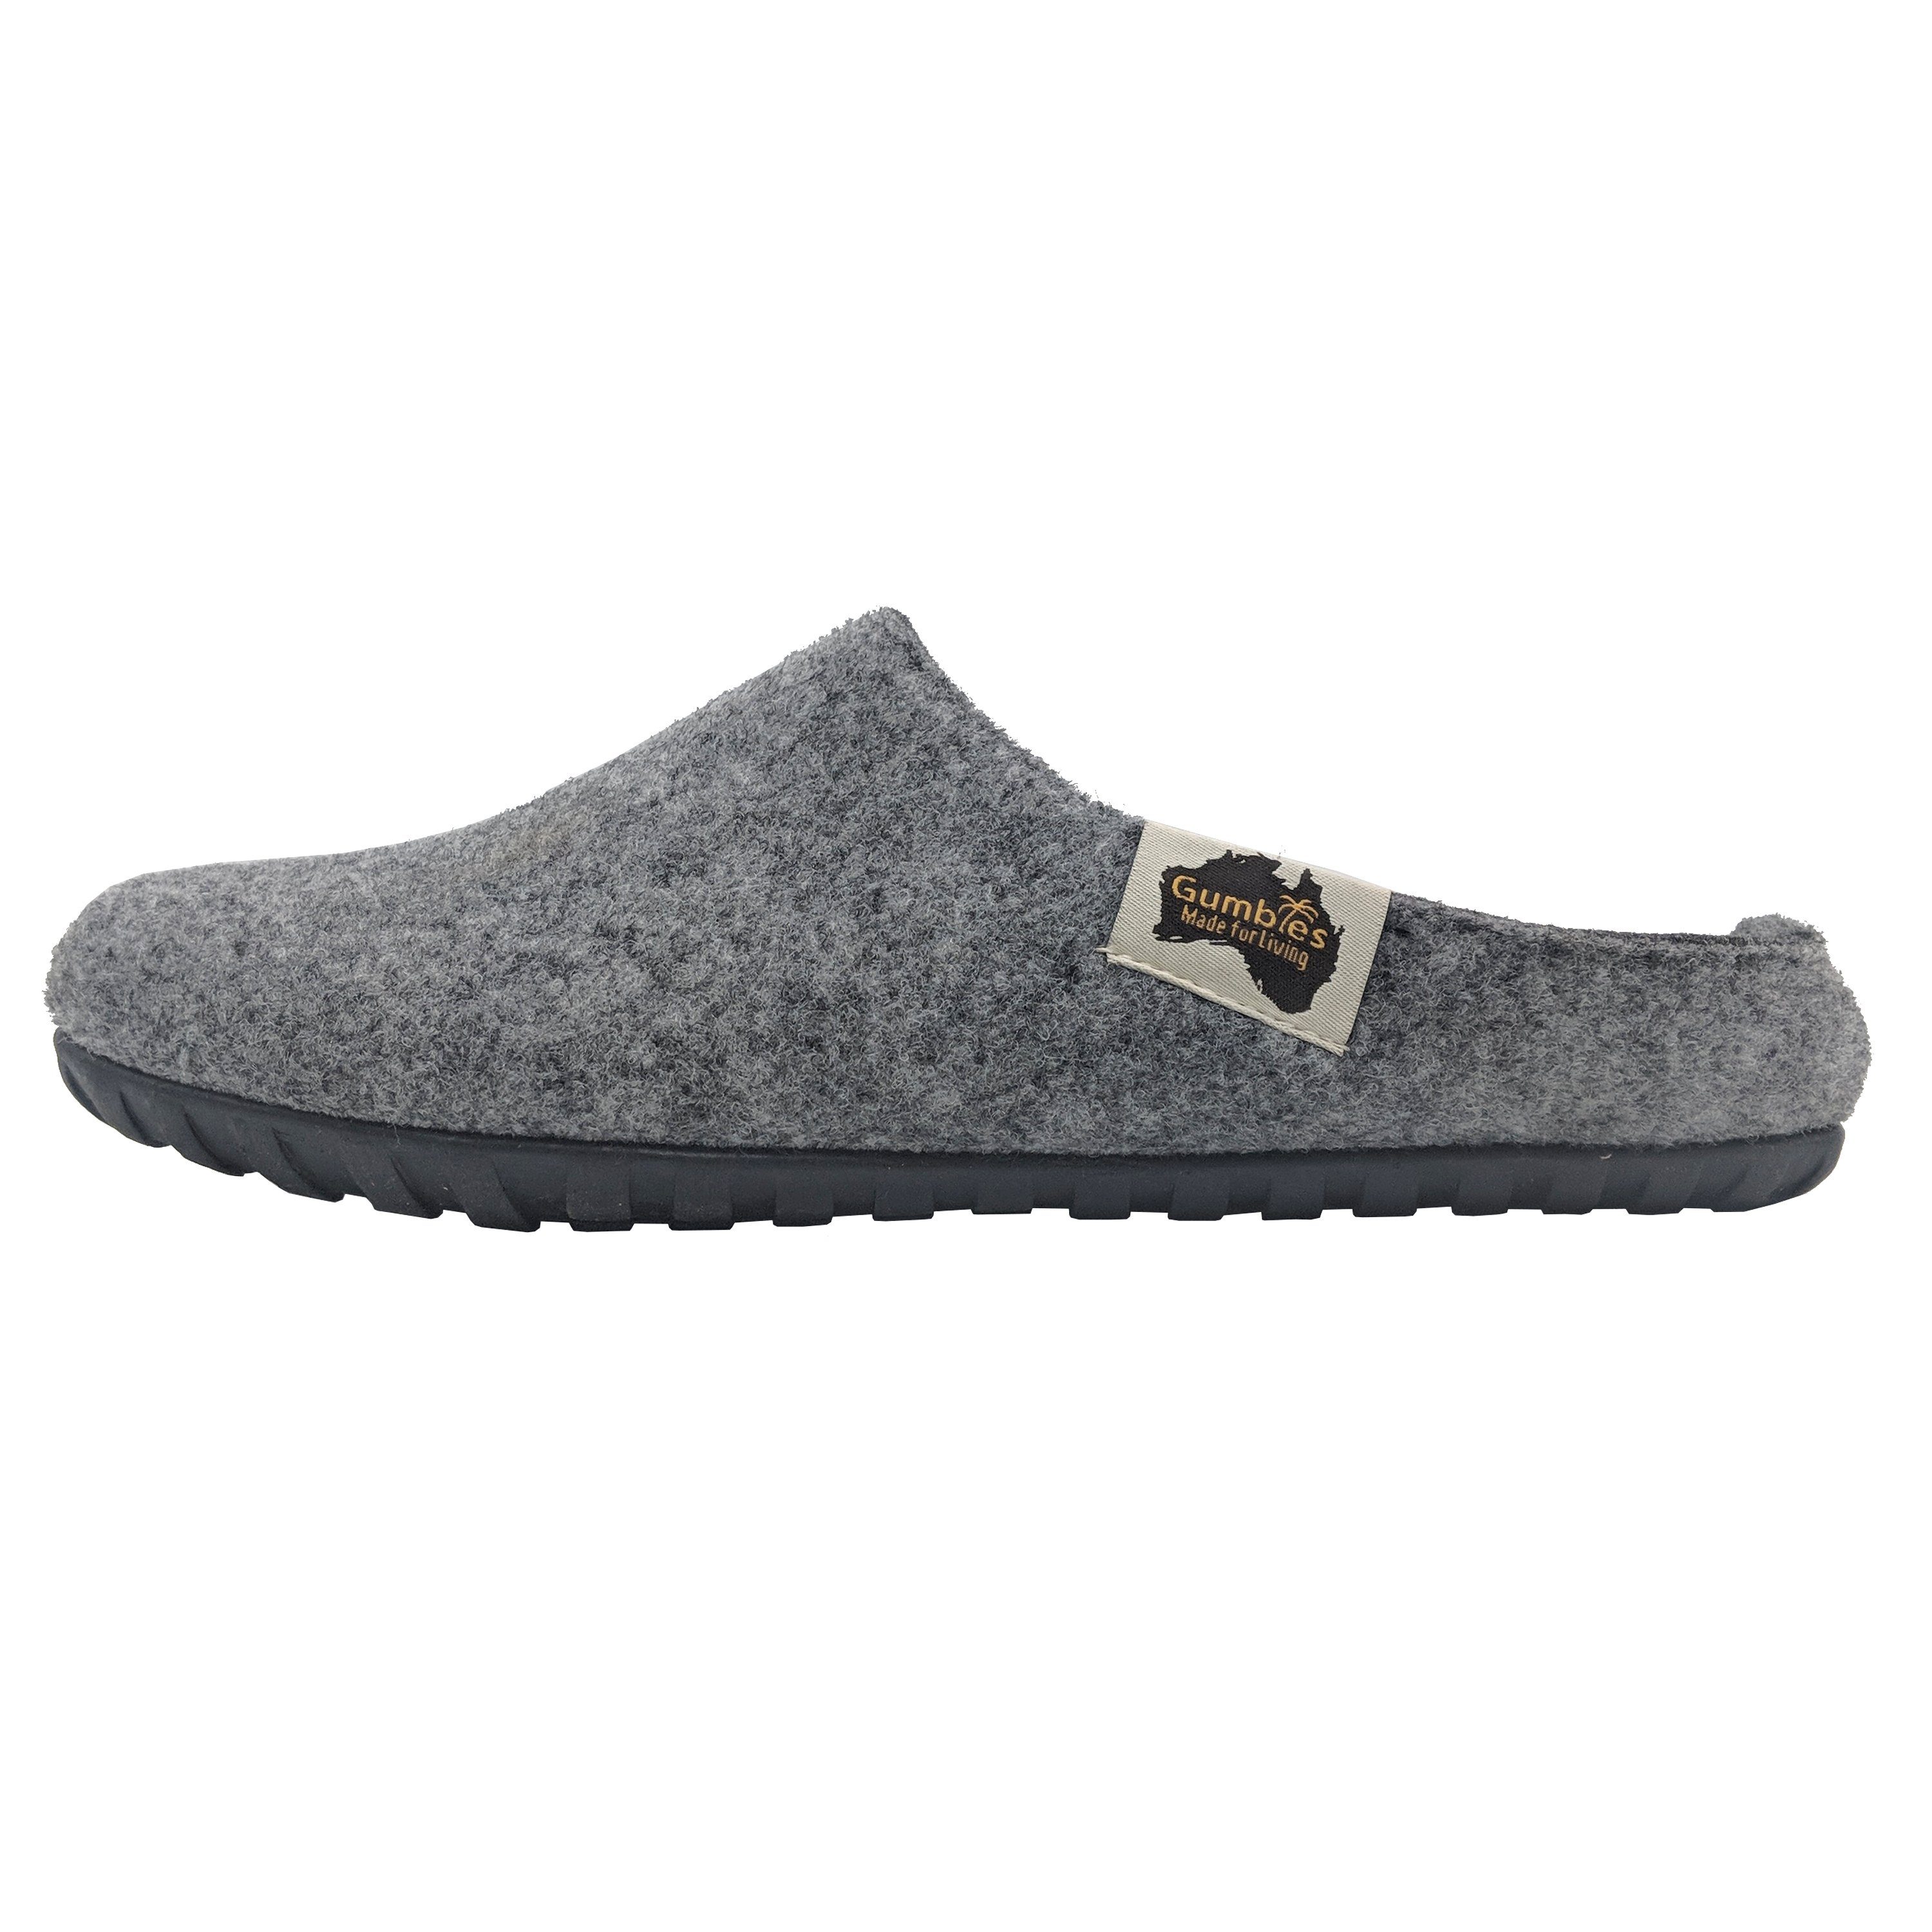 Hausschuh Outback farbenfrohen Materialien Gumbies recycelten Grey Charcoal Slipper in »in Designs« aus